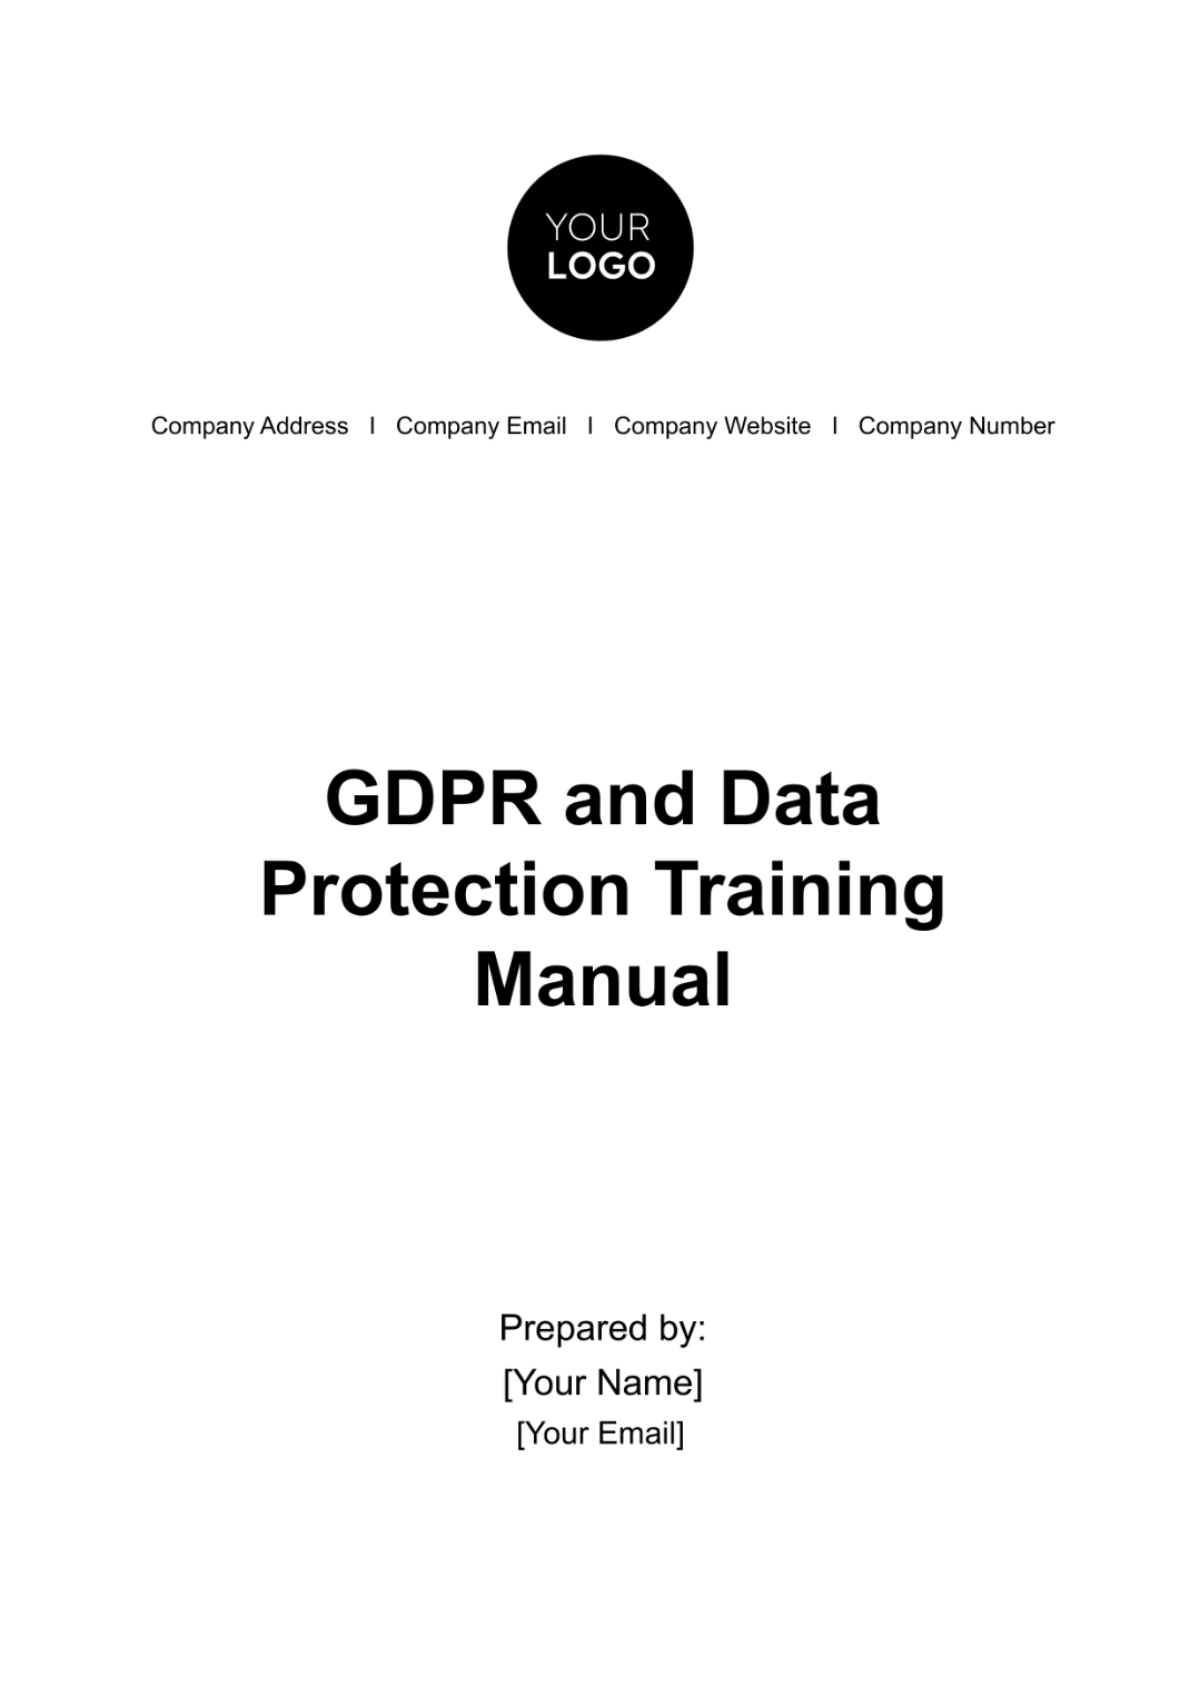 GDPR and Data Protection Training Manual HR Template